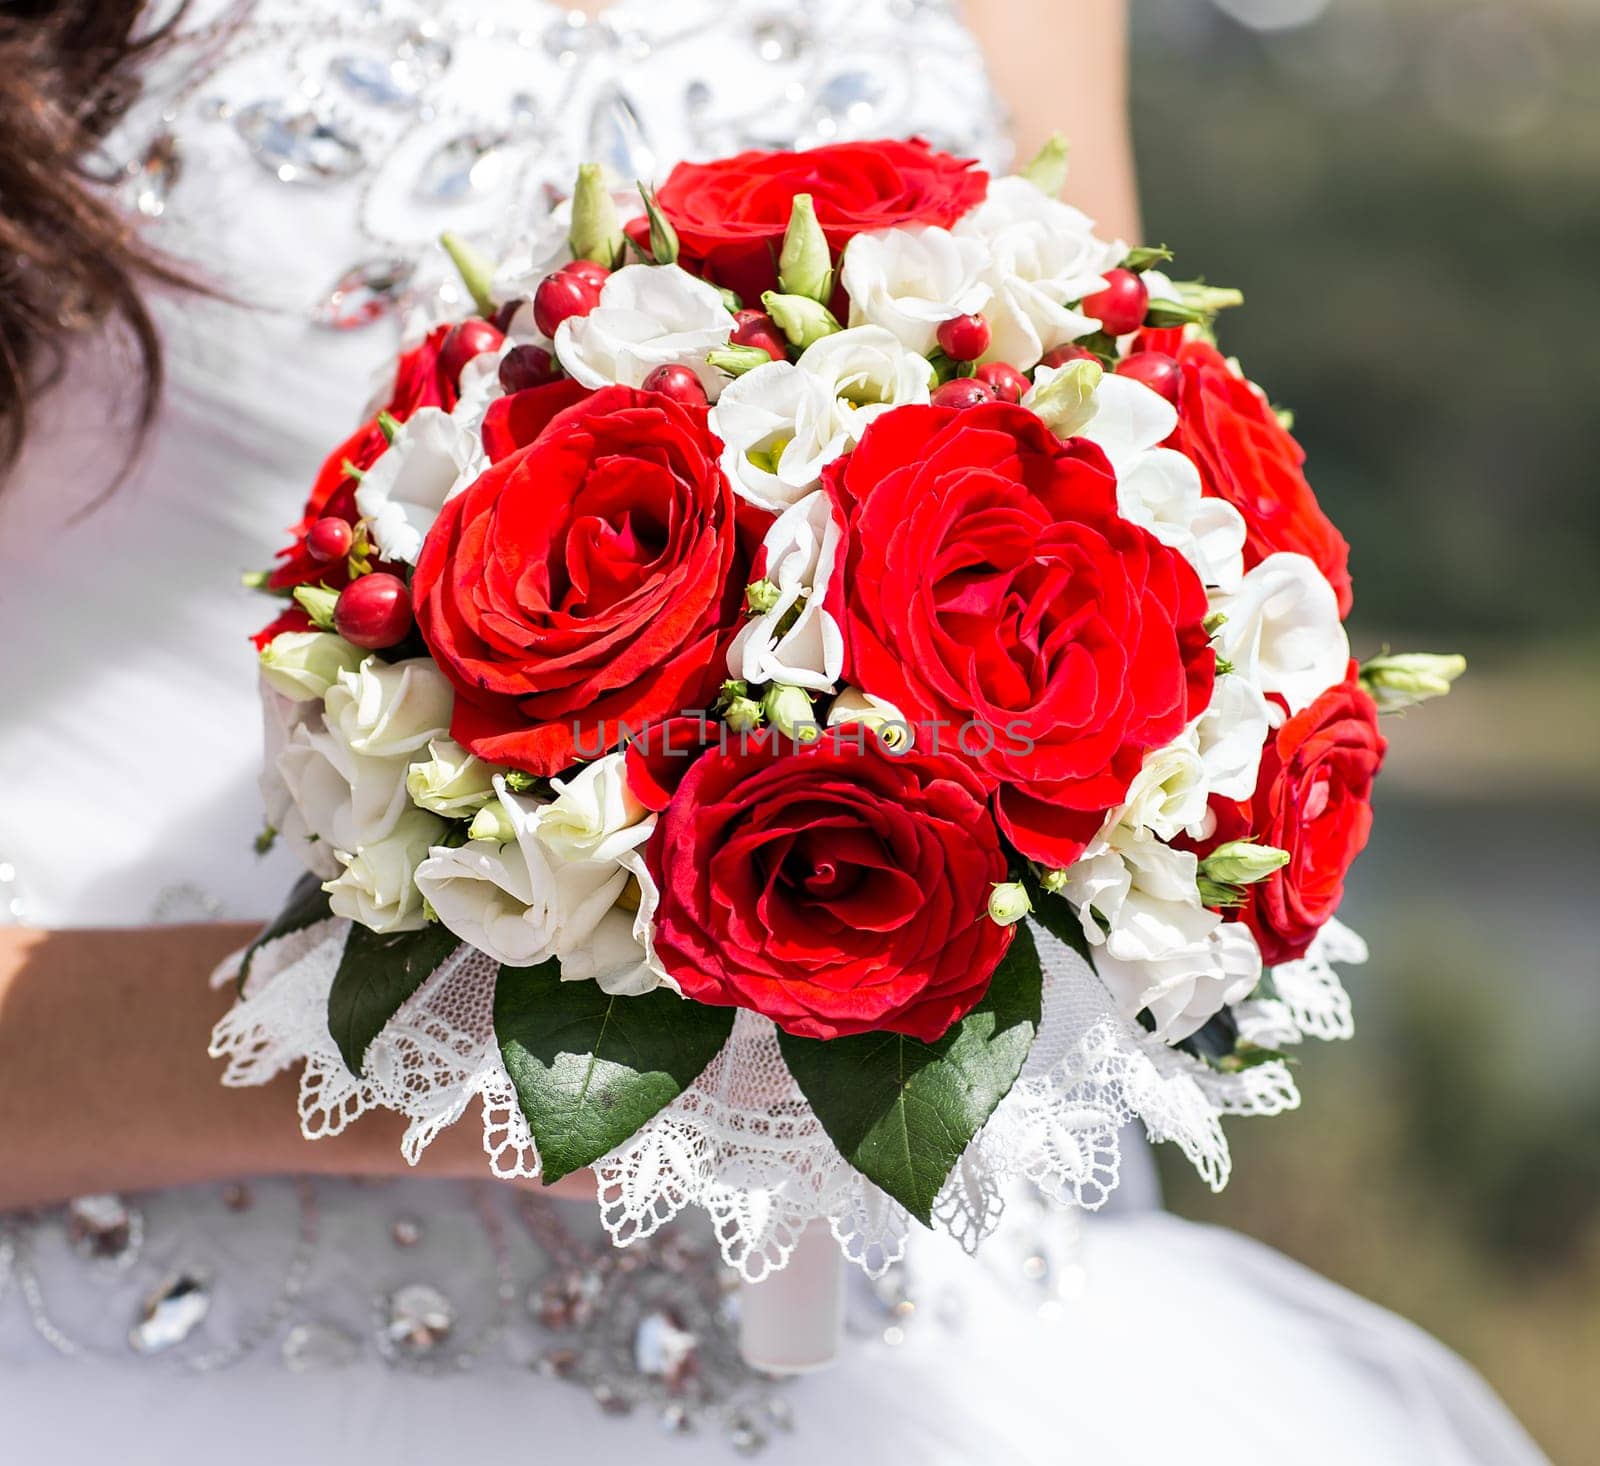 Beautiful wedding bouquet in hands of the bride close-up by Satura86